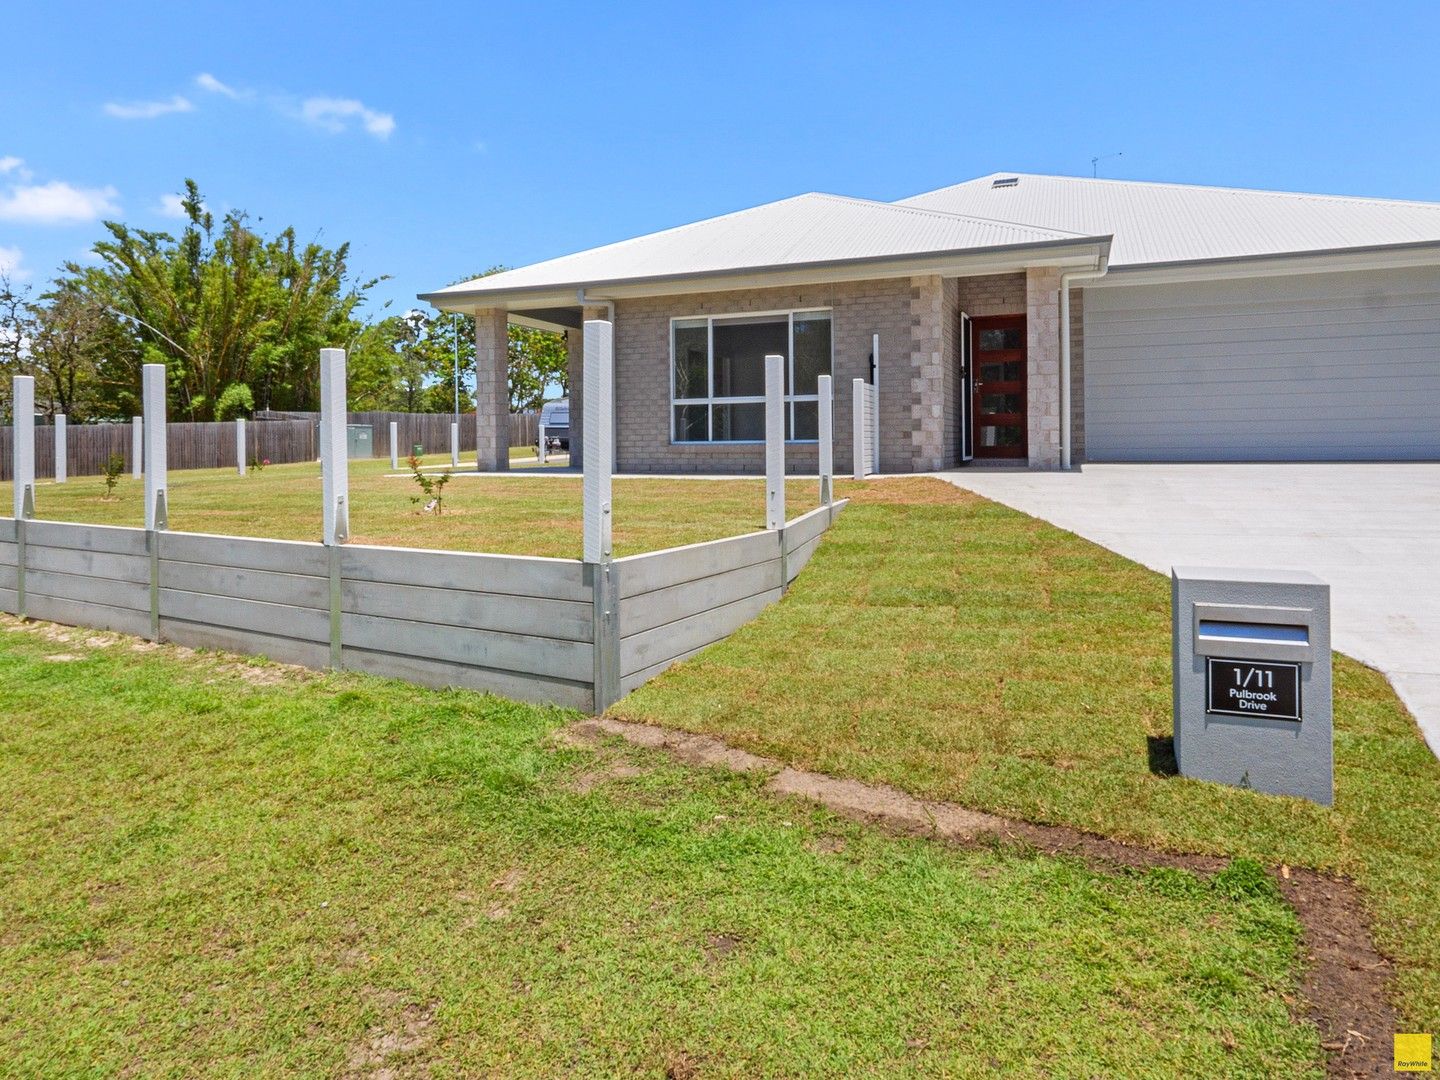 3 bedrooms Duplex in 1/11 Pulbrook Drive CAPALABA QLD, 4157